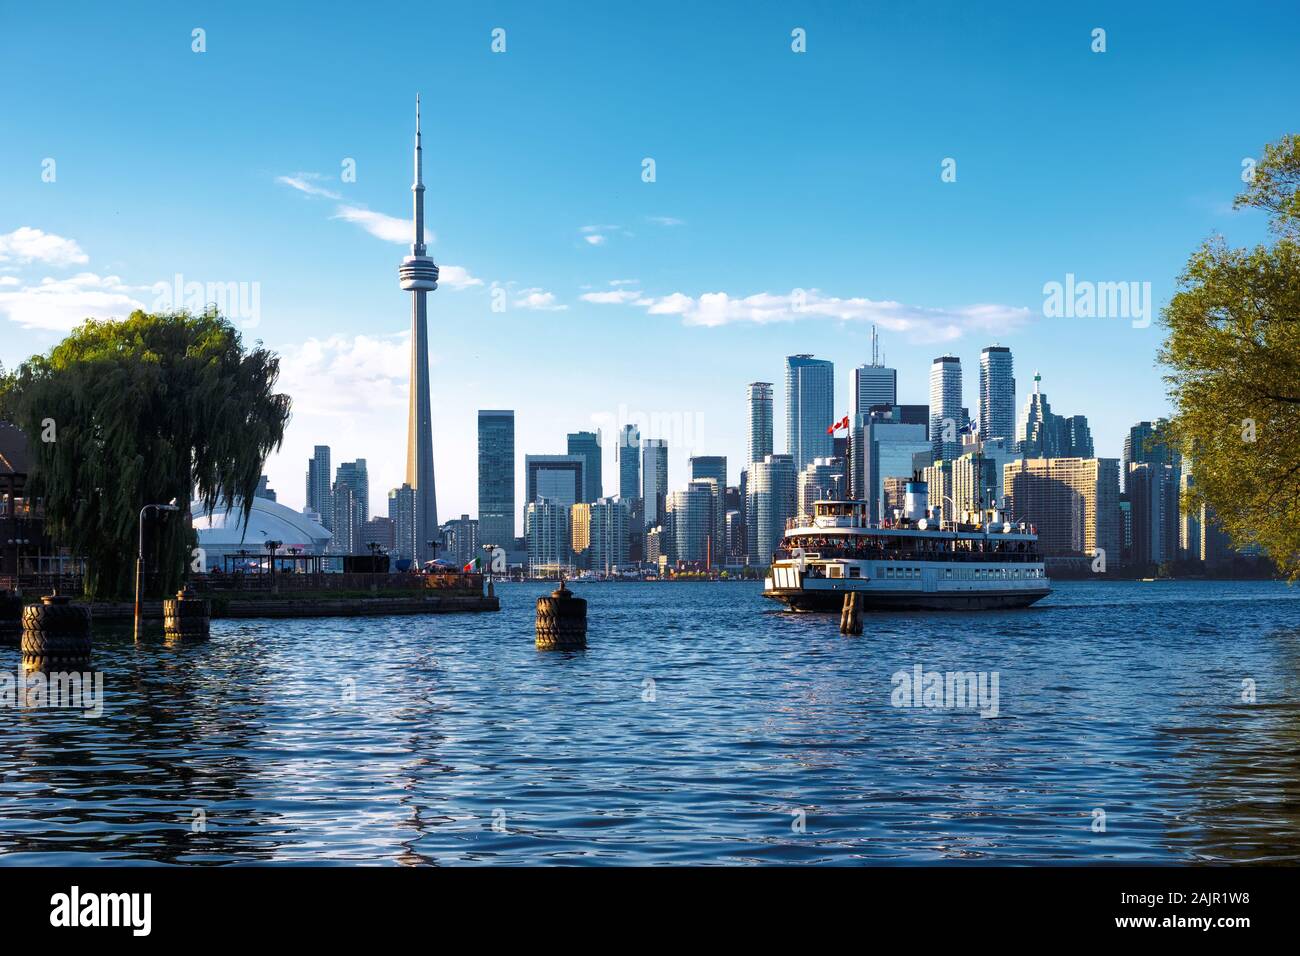 Toronto, Ontario, Canada, view of iconic Toronto skyline showing ferry boat arriving at Centre Island by day in fall season. Stock Photo